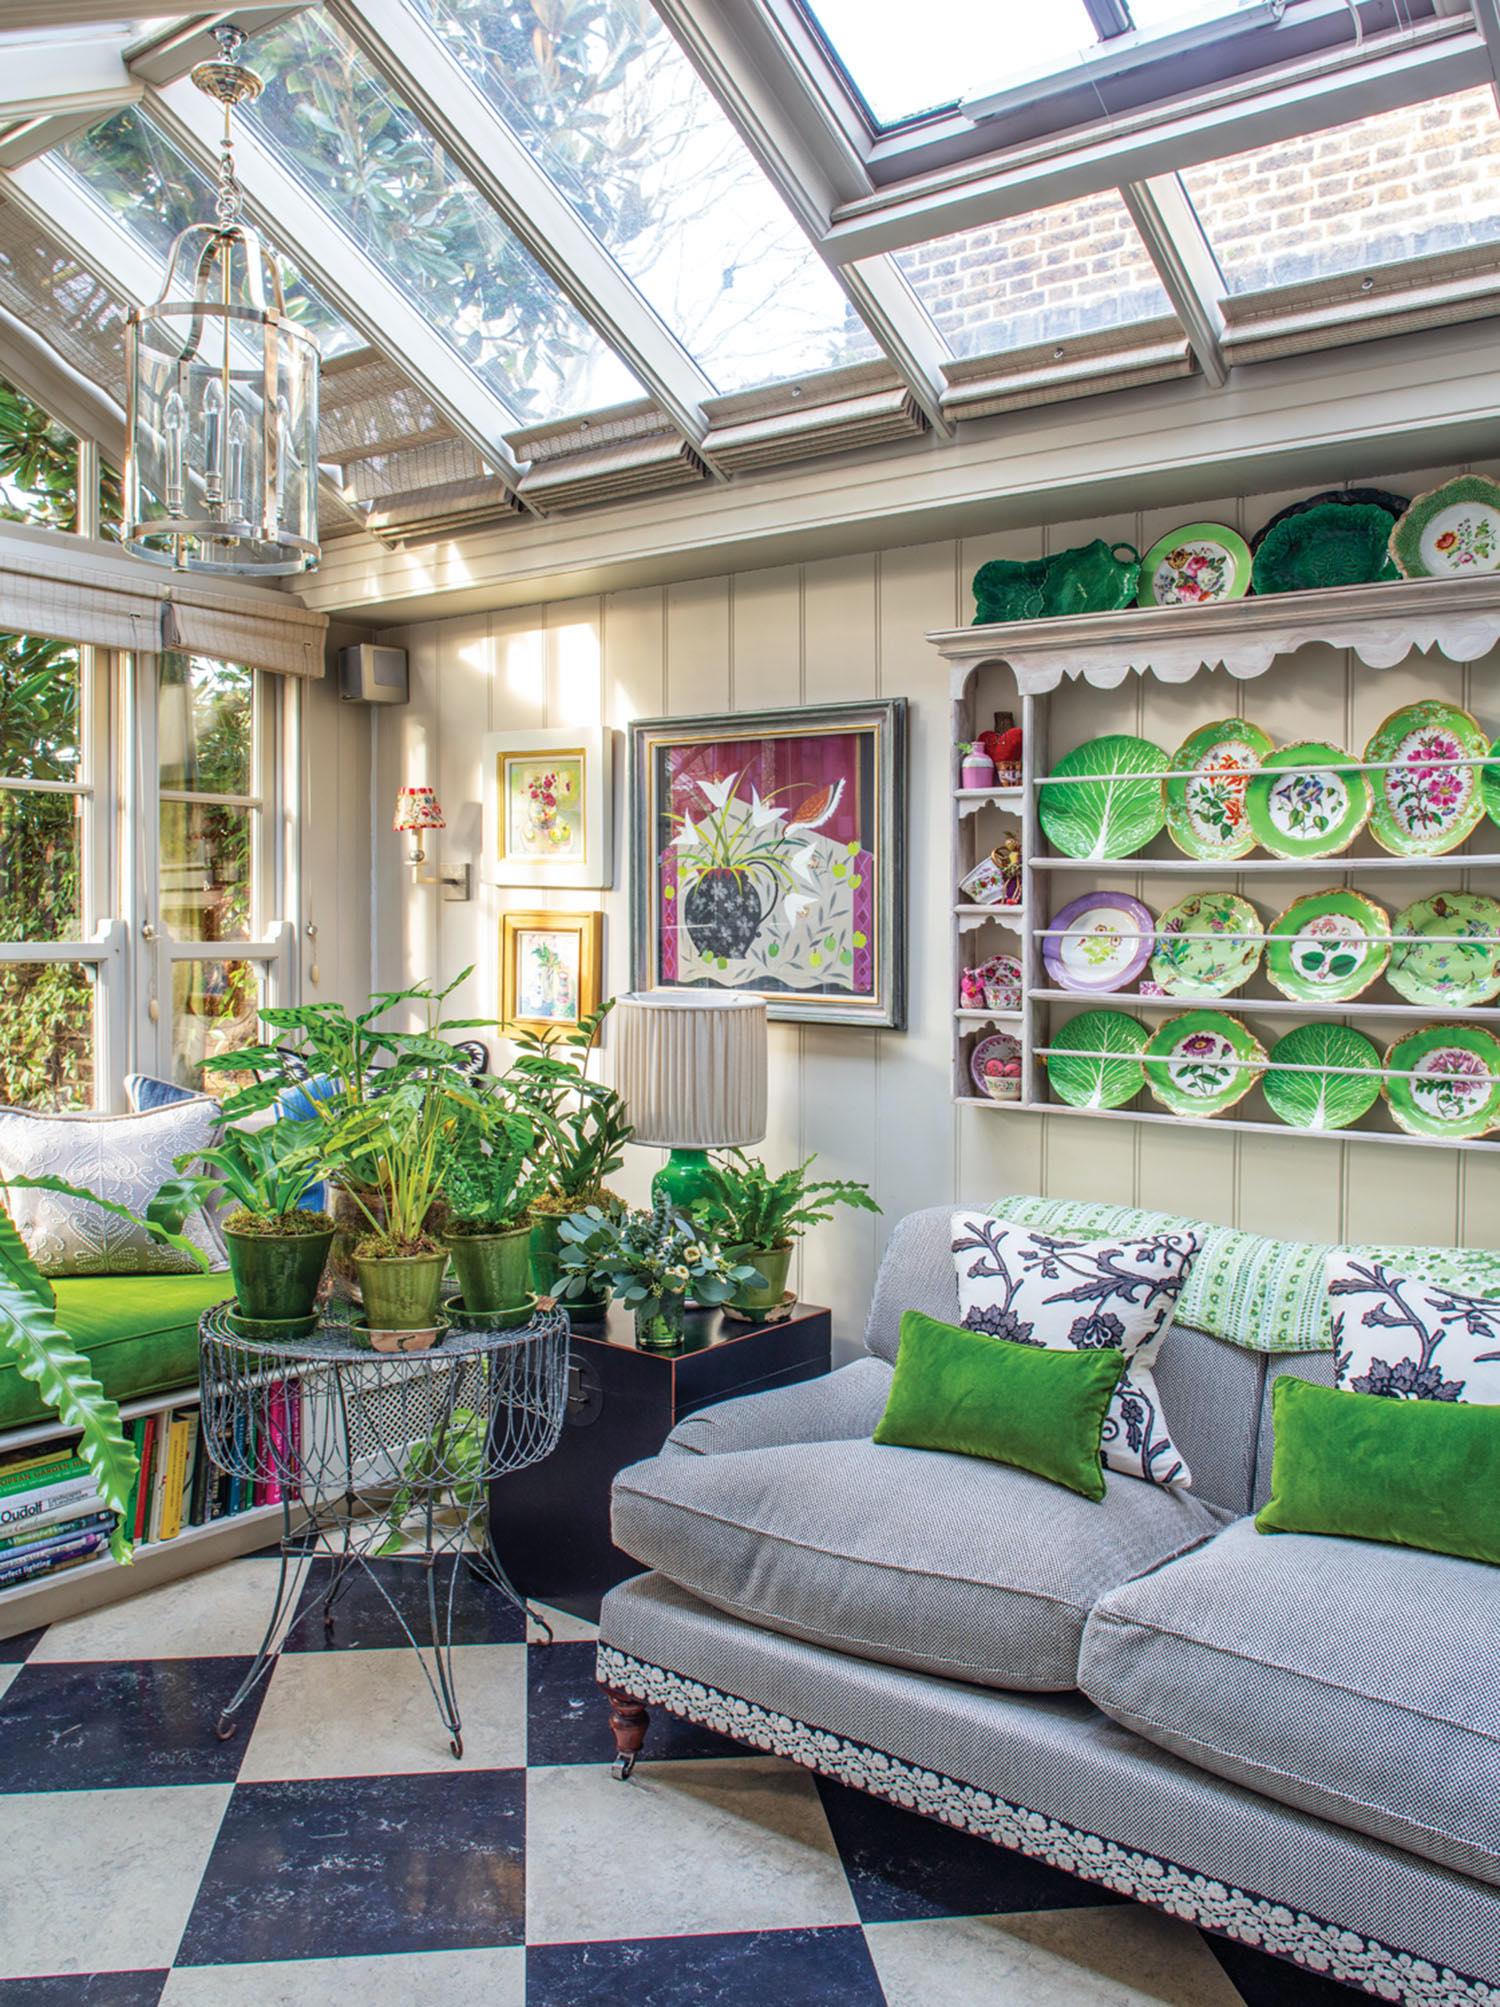 The conservatory, with views of the garden, is painted a soothing gray with strong accents of green.